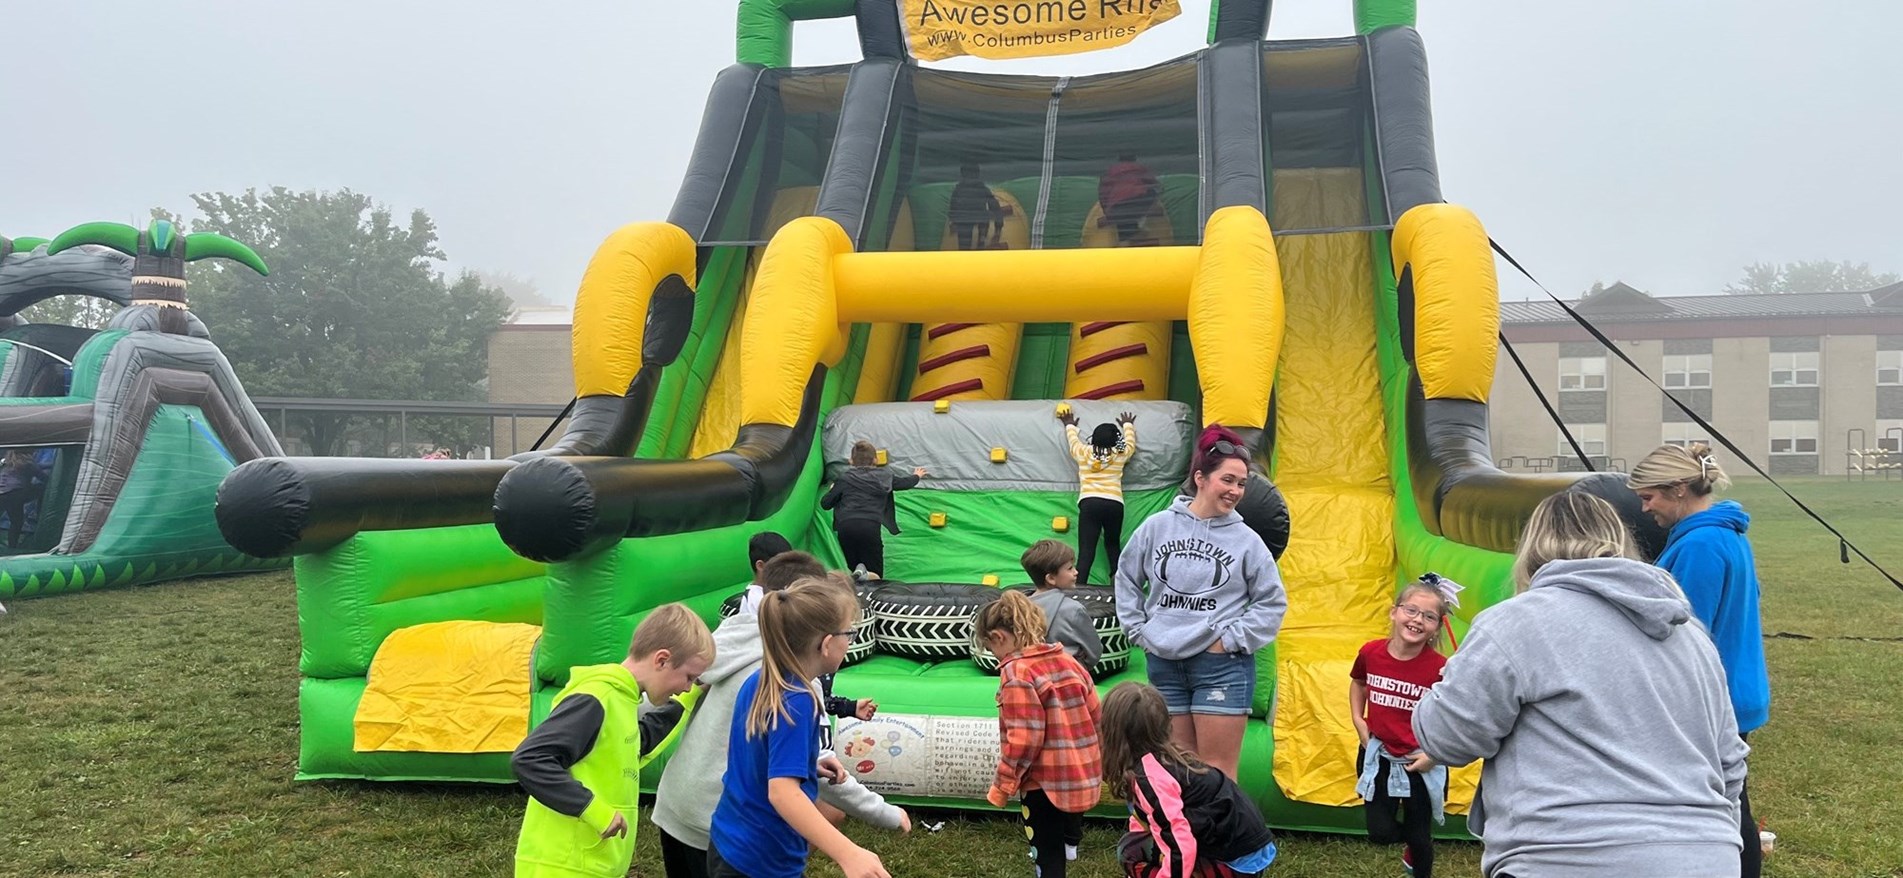 Students and PTO members enjoy playing on inflatable attractions during Walk-A-Thon event.